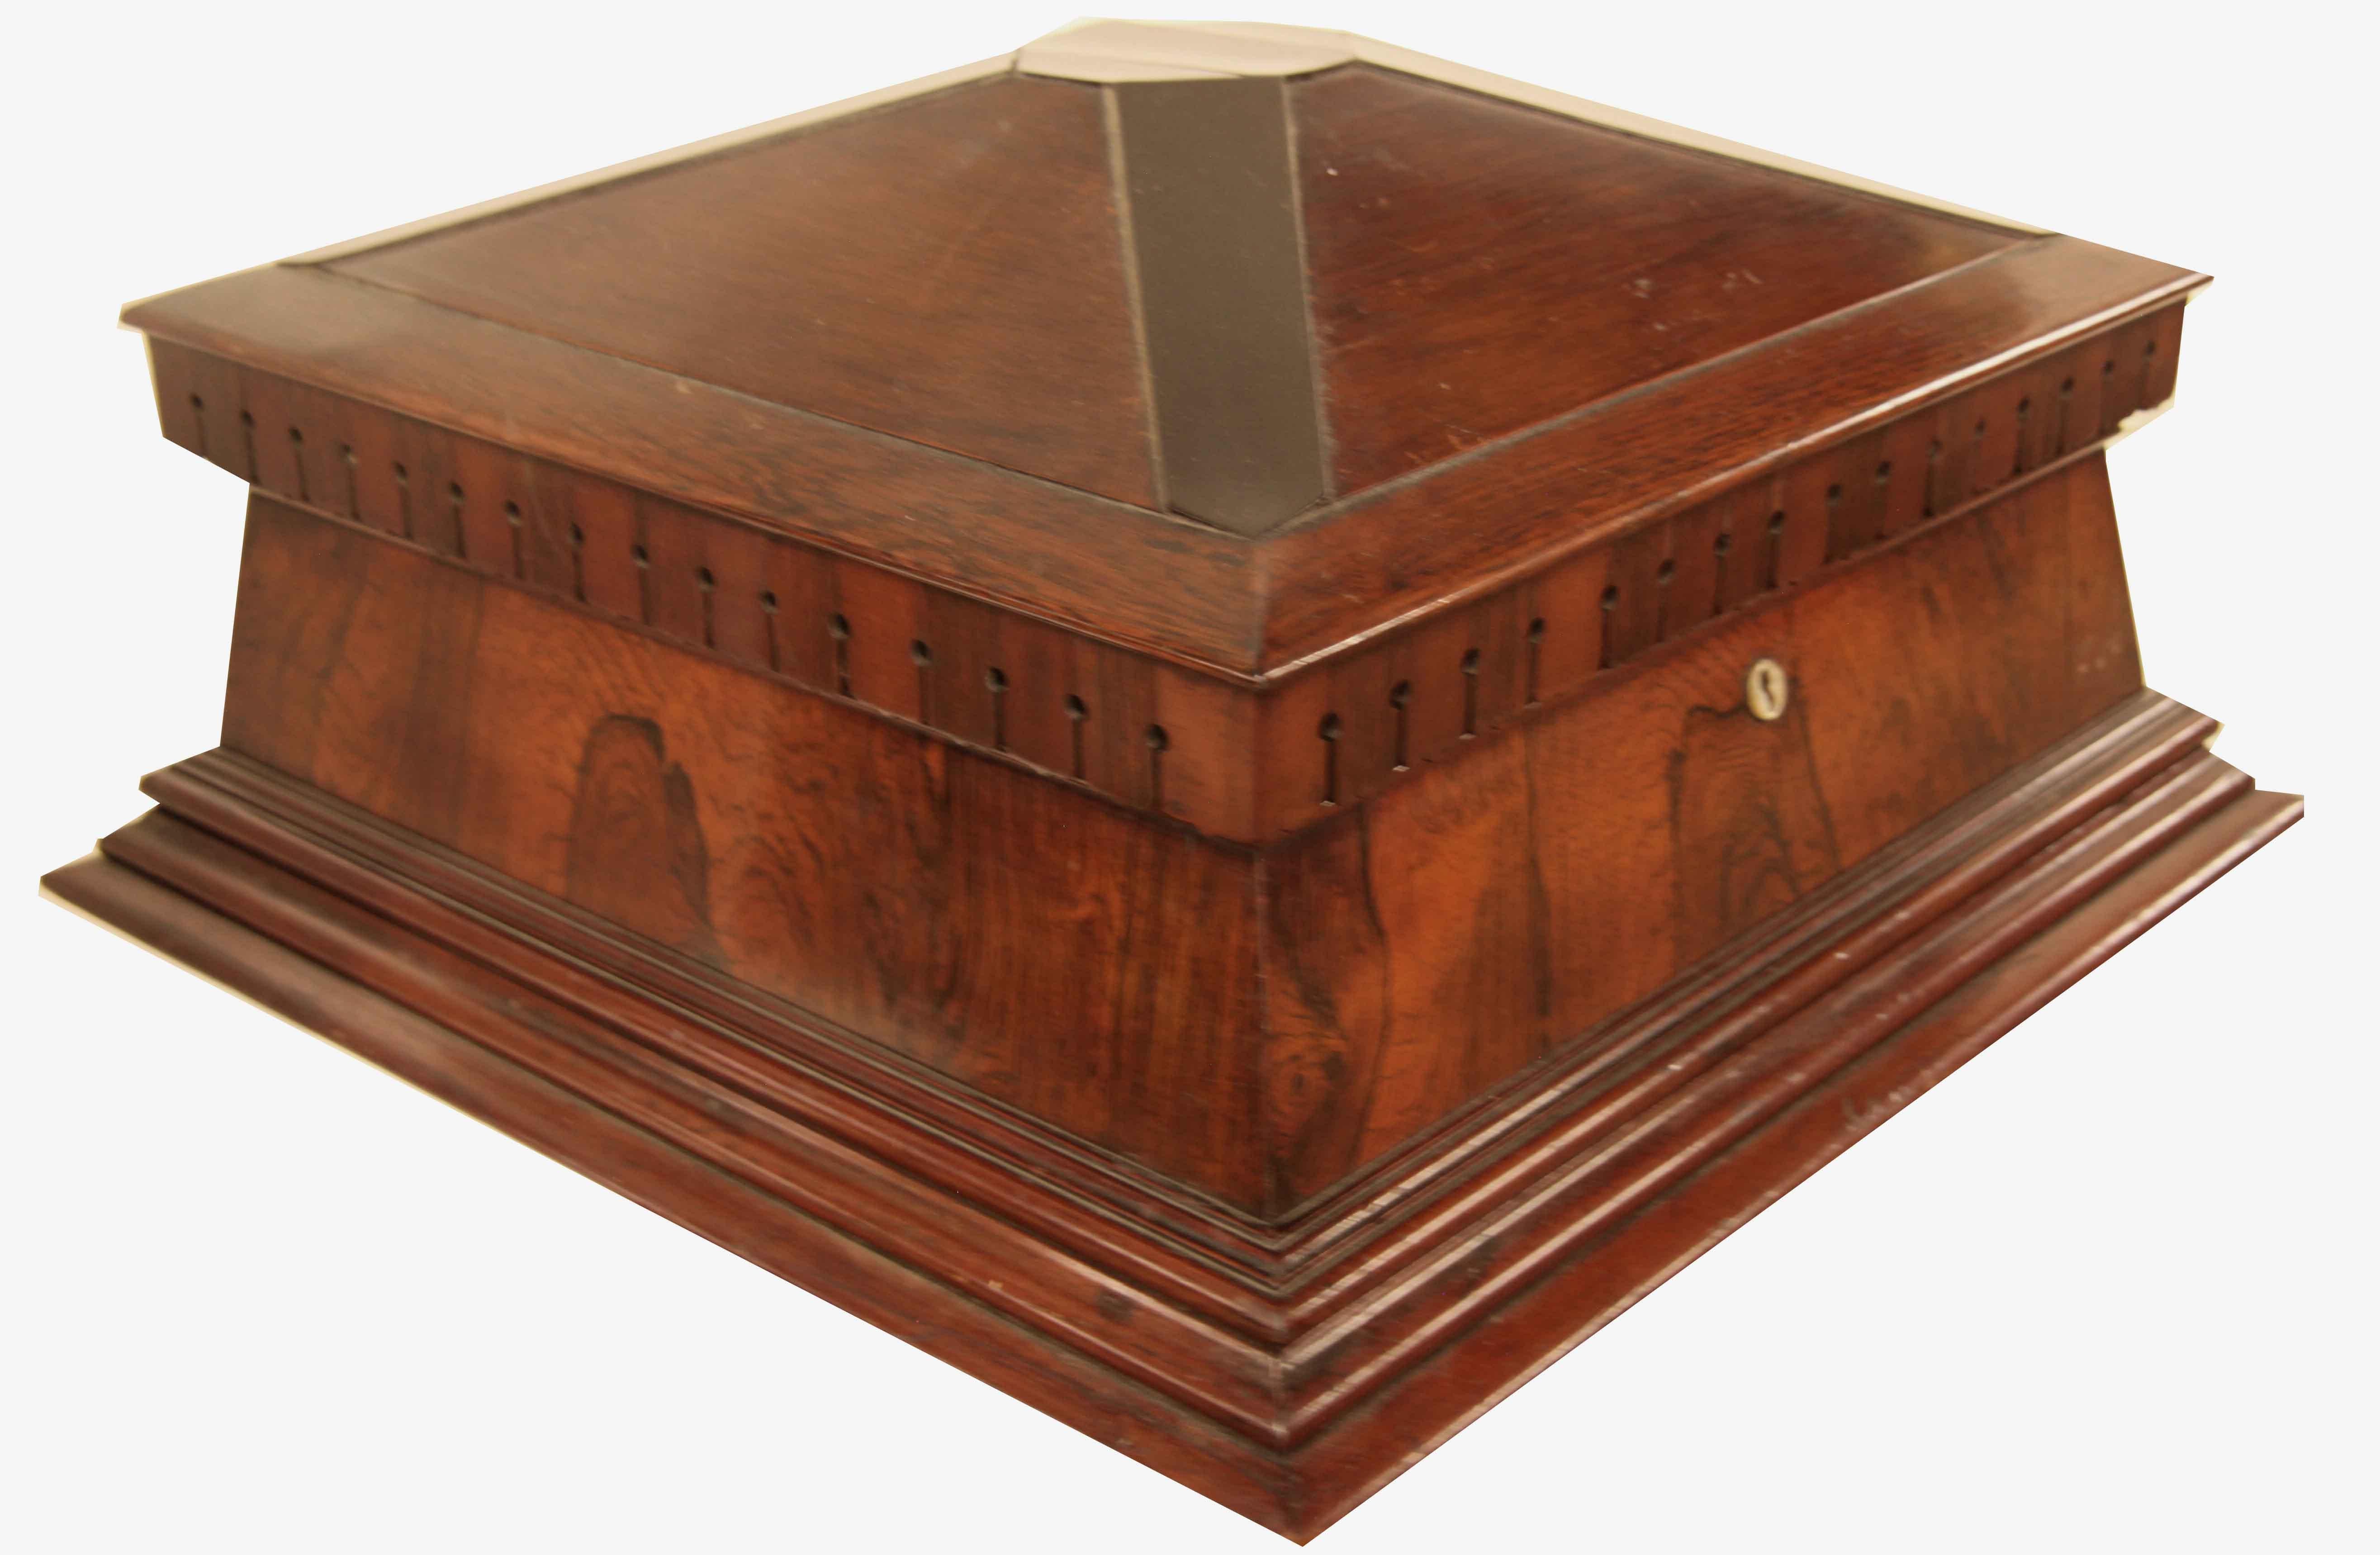 English rosewood fitted dressing box, the top is angled up on all four sides, top features an octagonal ebony center piece with tapering ebony inlays coming down from each corner. an interesting dentil molding is below .  All sides have vertical